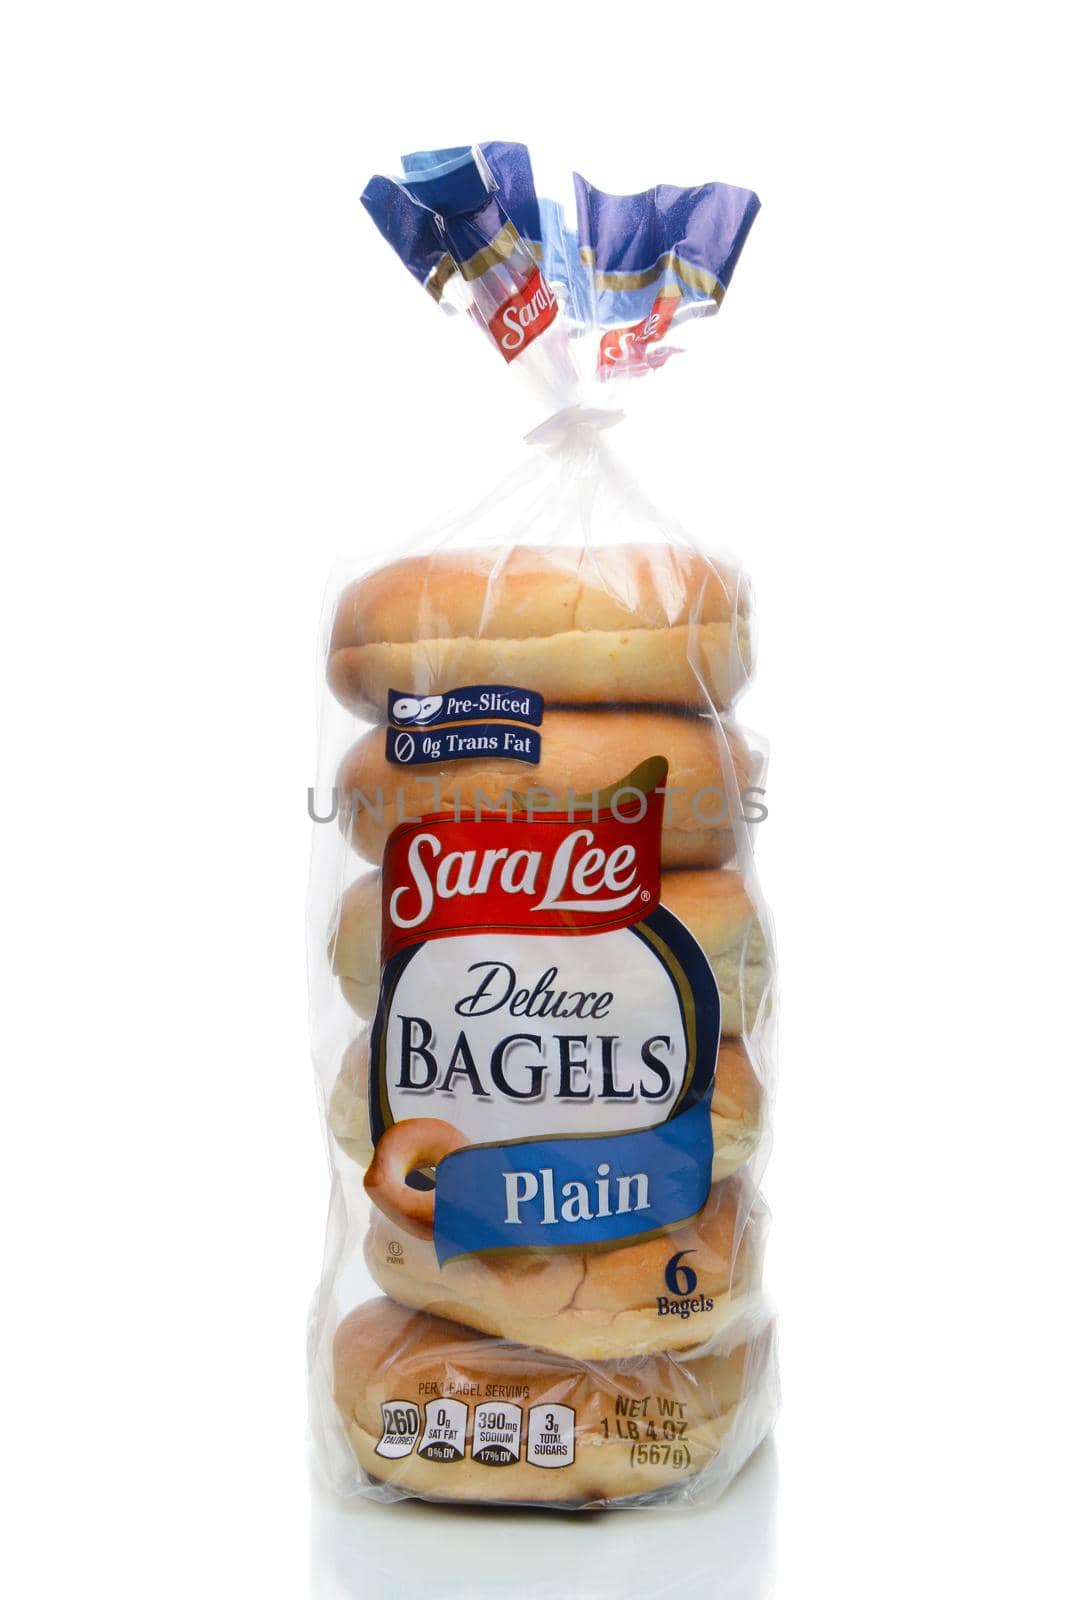 IRVINE, CALIFORNIA - JANUARY 4, 2018: Sara Lee Plain Bagels. Prior to 1985, The Sara Lee Corporation was called Consolidated Foods, of which Sara Lee was the best known brand.